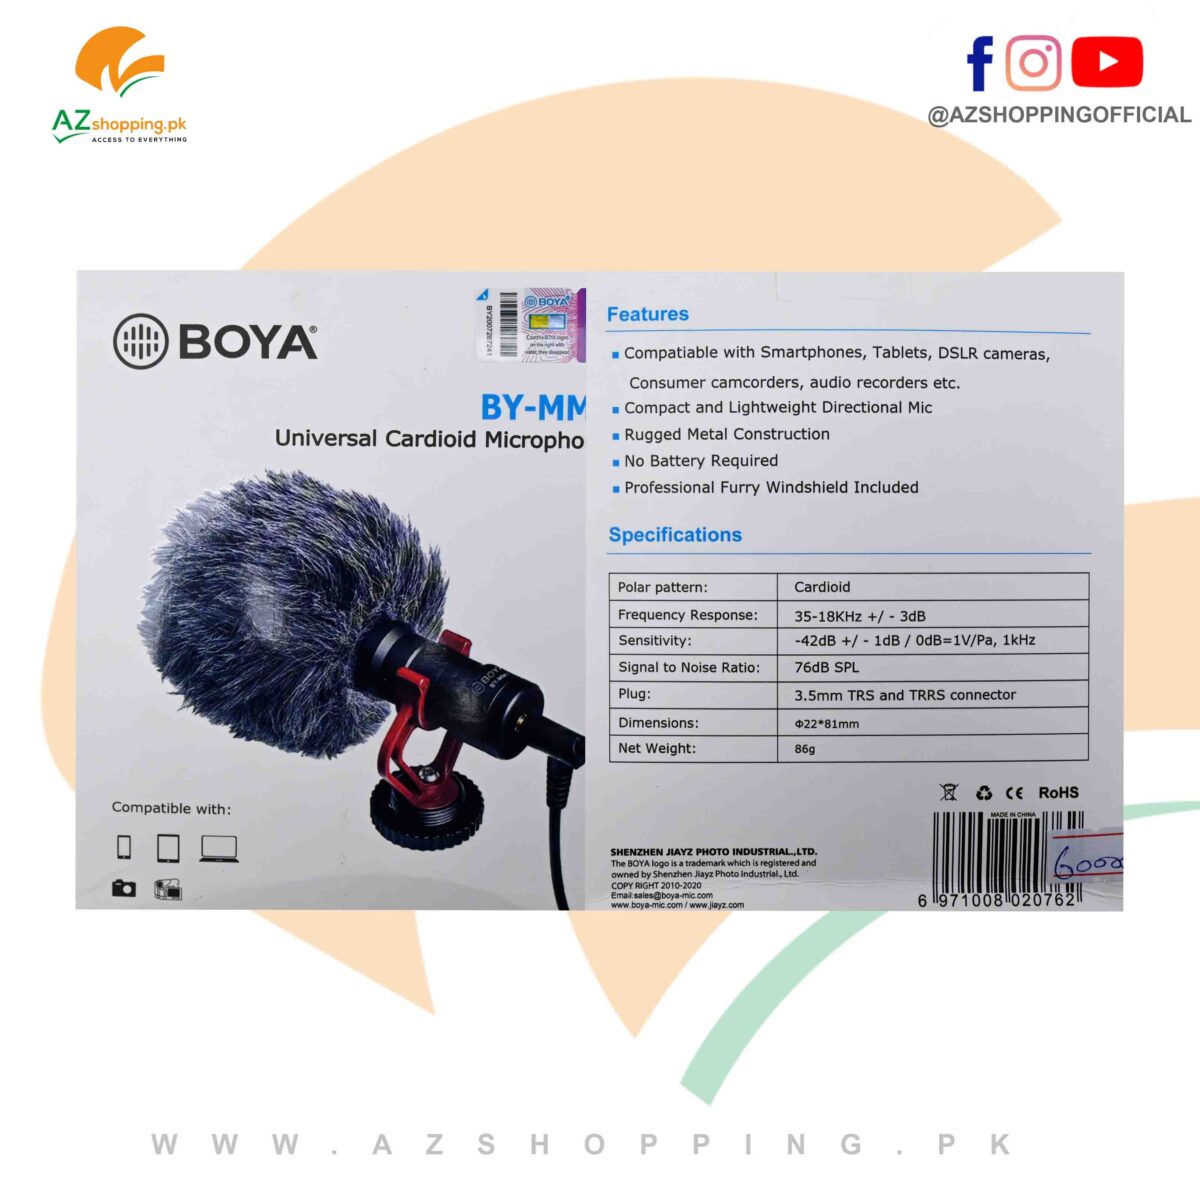 Boya – Universal Cardioid Shotgun Microphone – Compatible with Phones, Tablets, PC & Laptop, All video DSLR Cameras - Model: BY-MM1